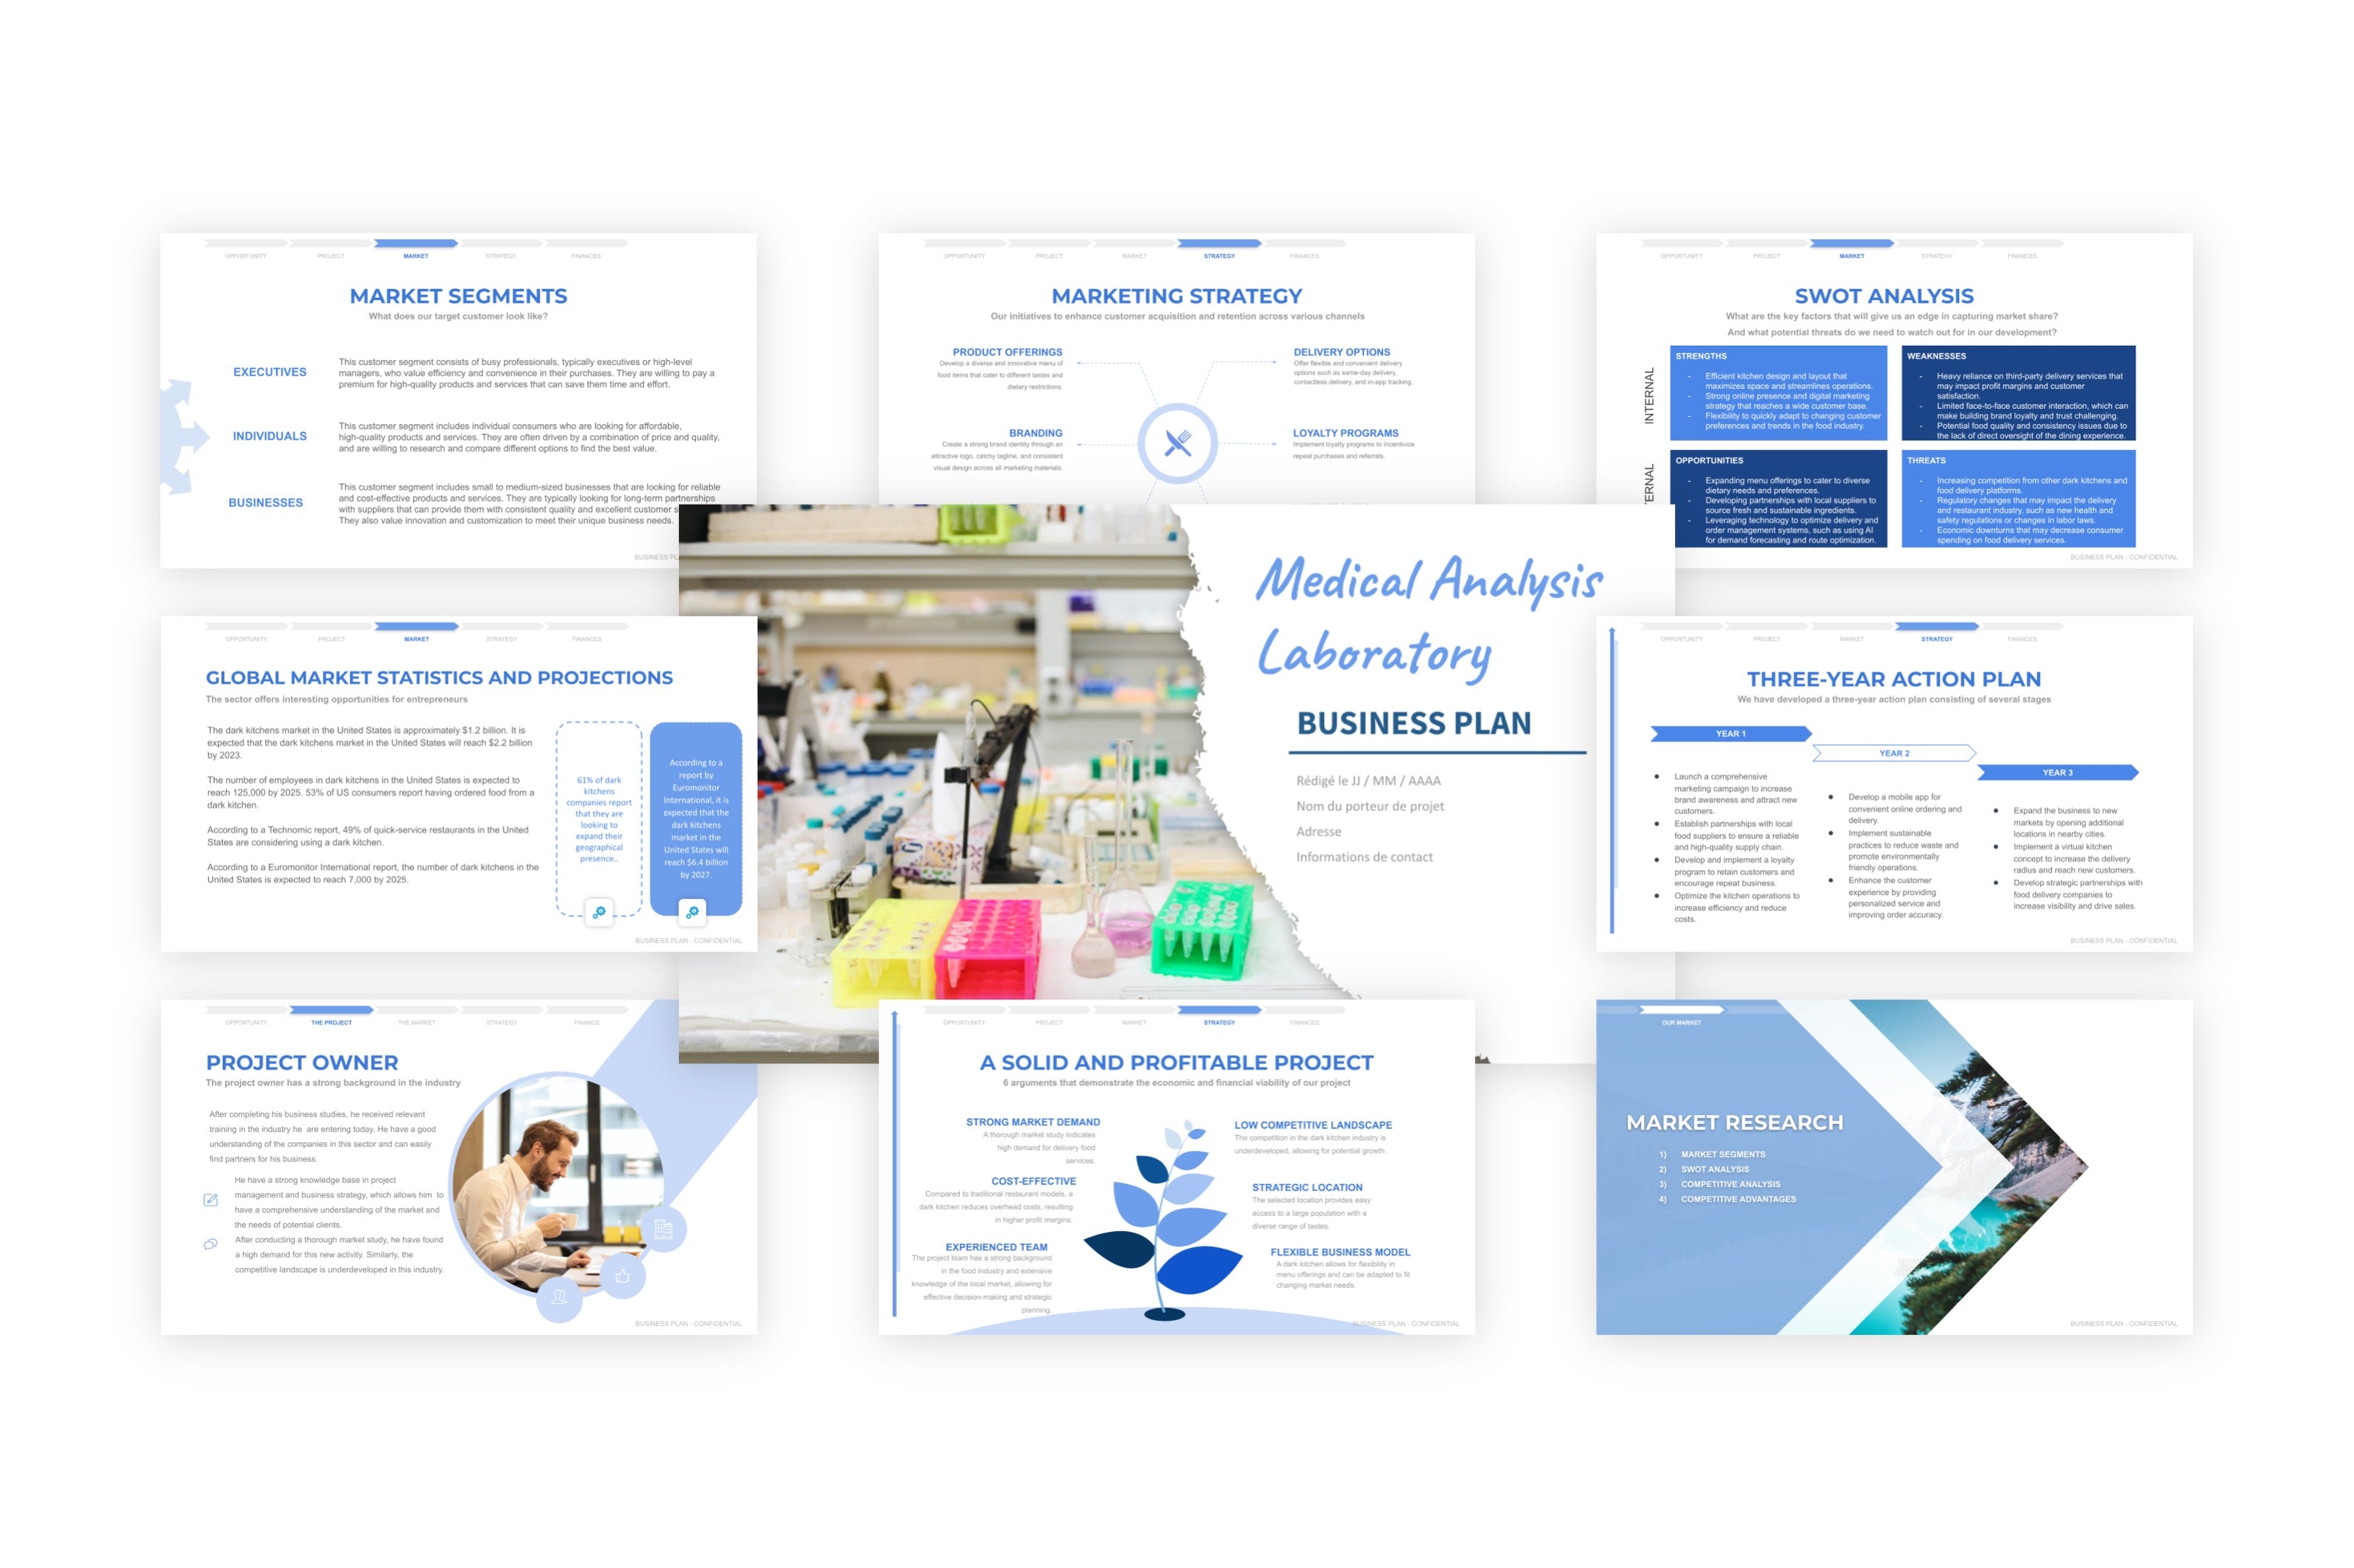 business plan for a medical analysis laboratory